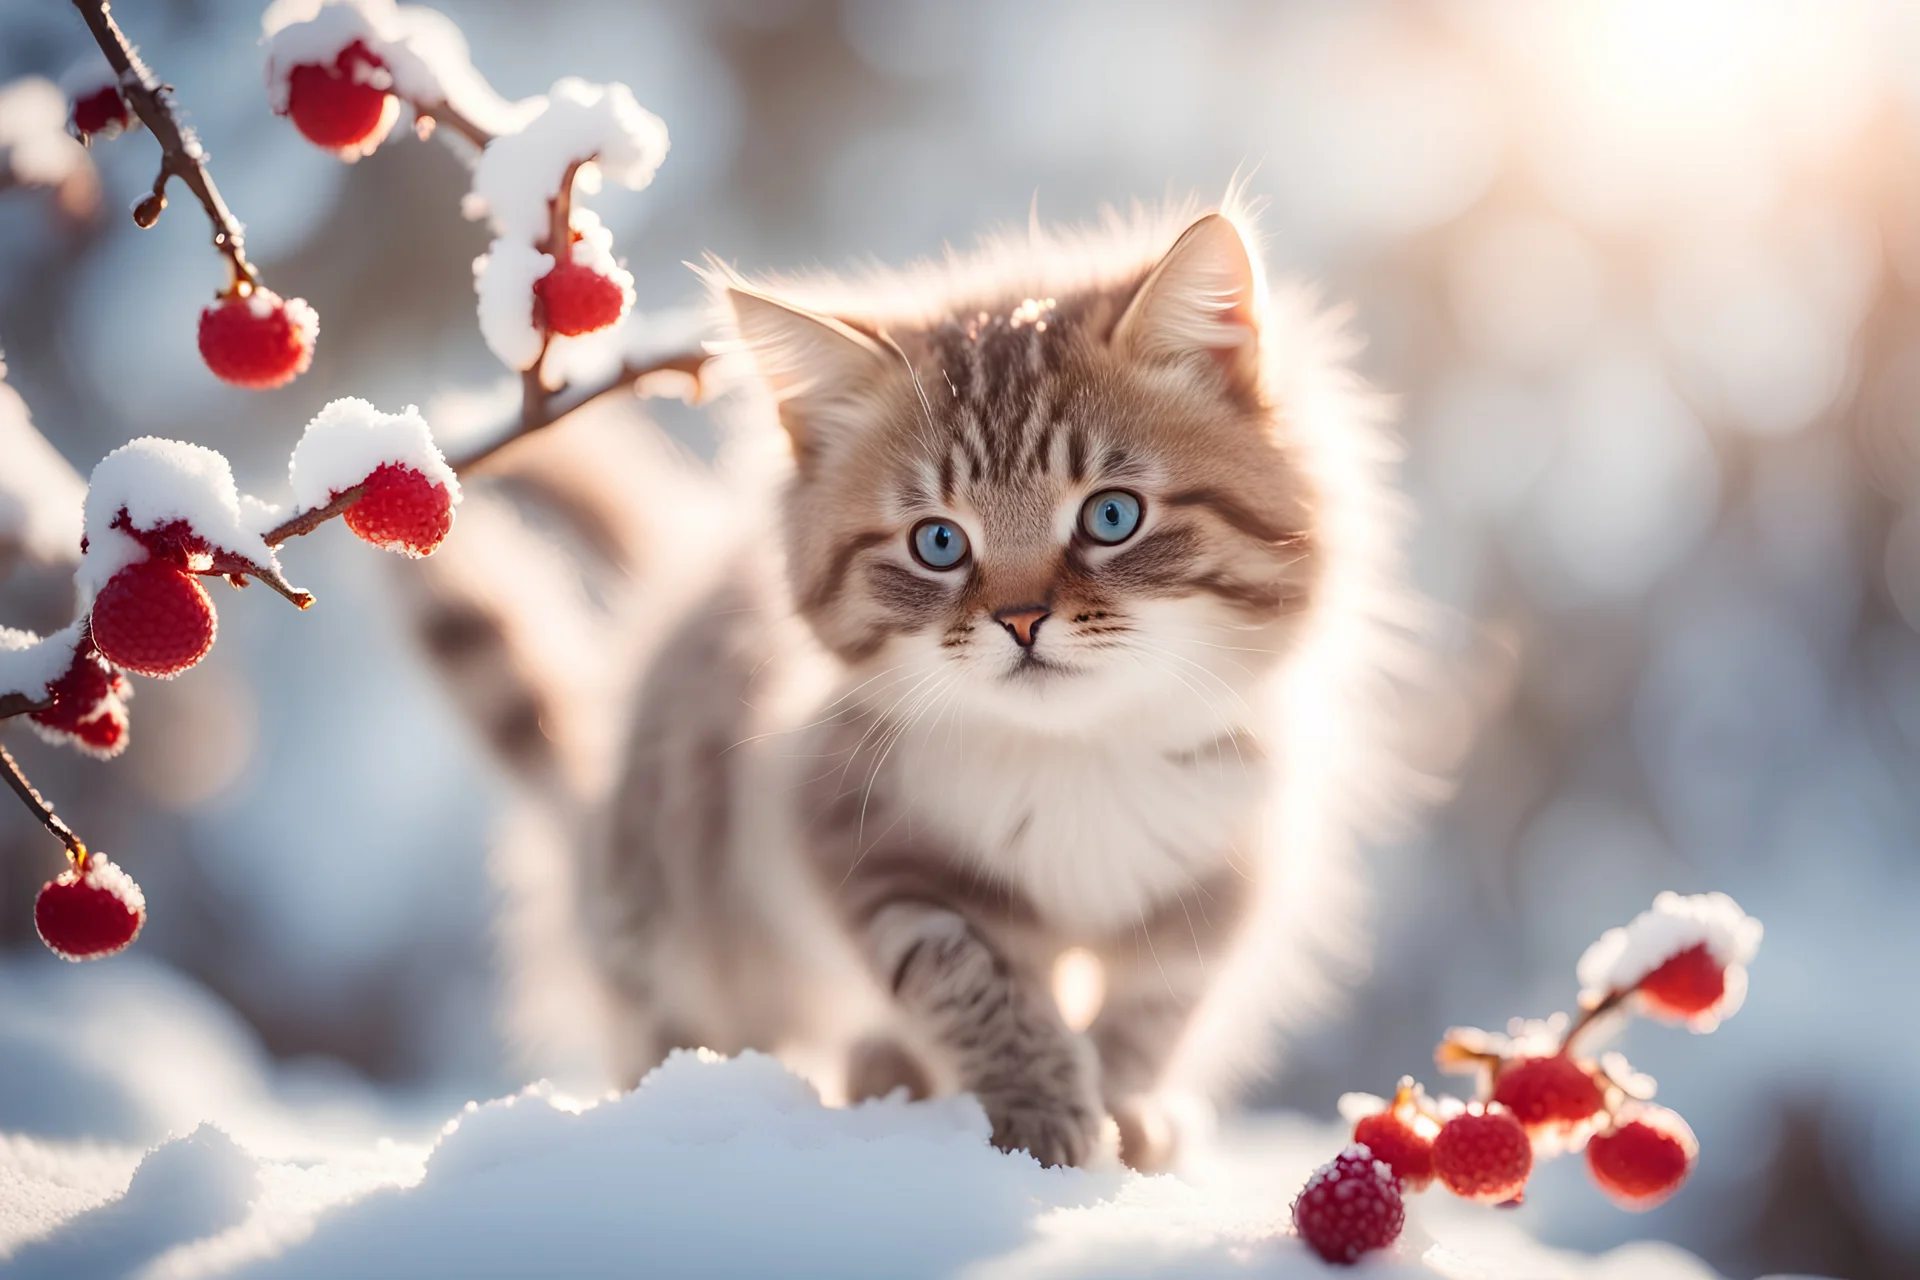 A beautiful little cat catches a berry while standing on a snowy branch in sunshine, ethereal, cinematic postprocessing, bokeh, dof